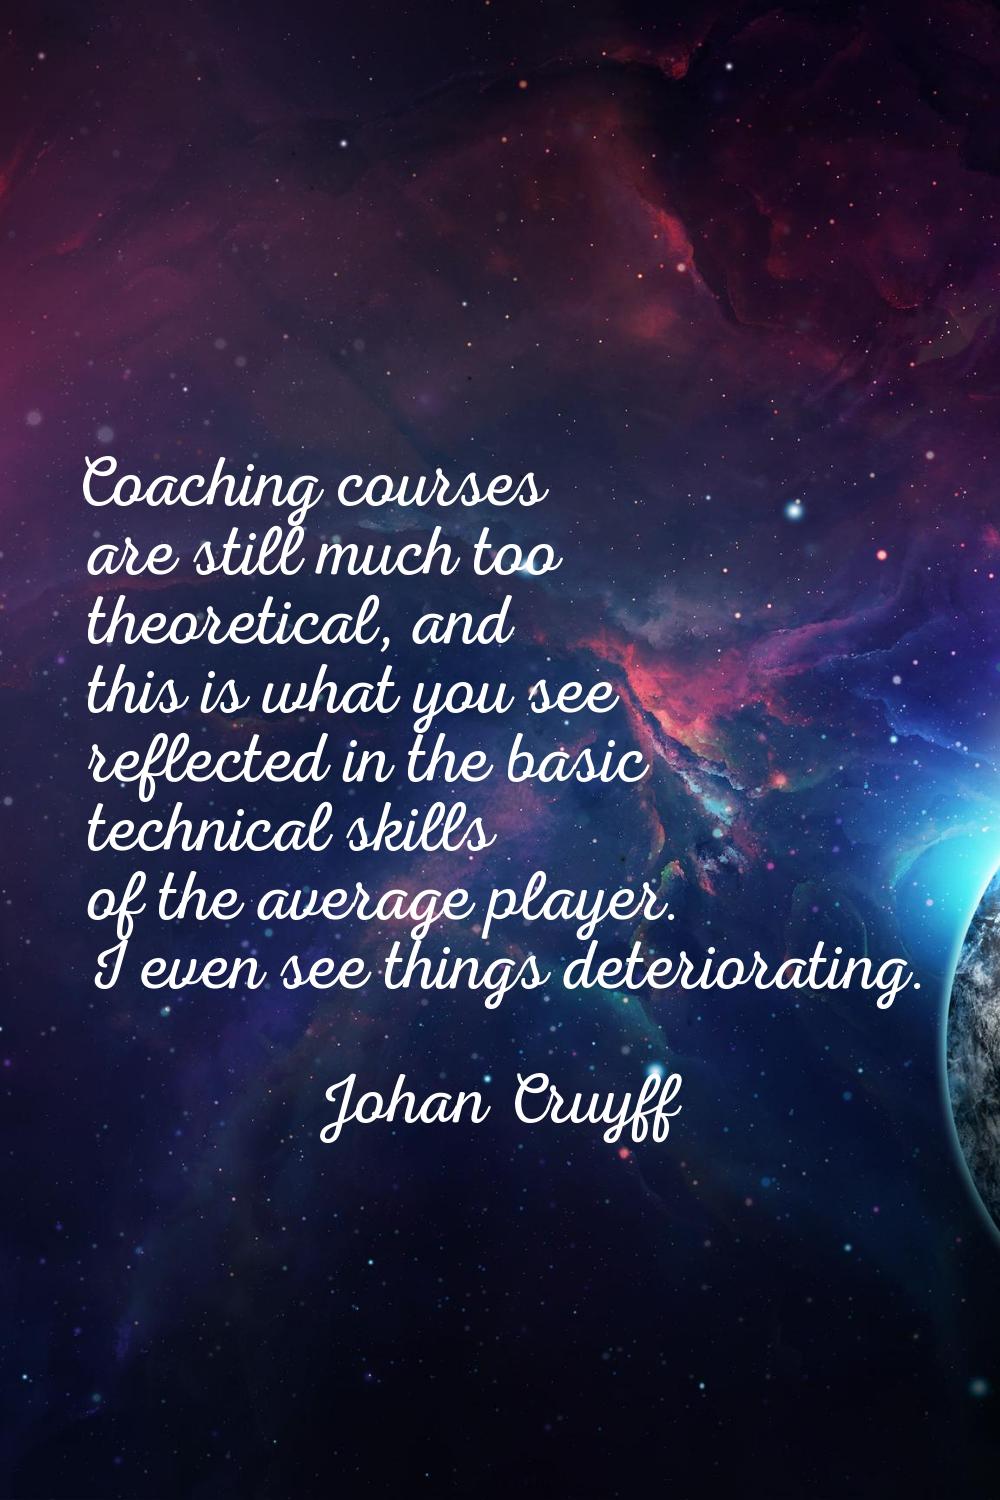 Coaching courses are still much too theoretical, and this is what you see reflected in the basic te